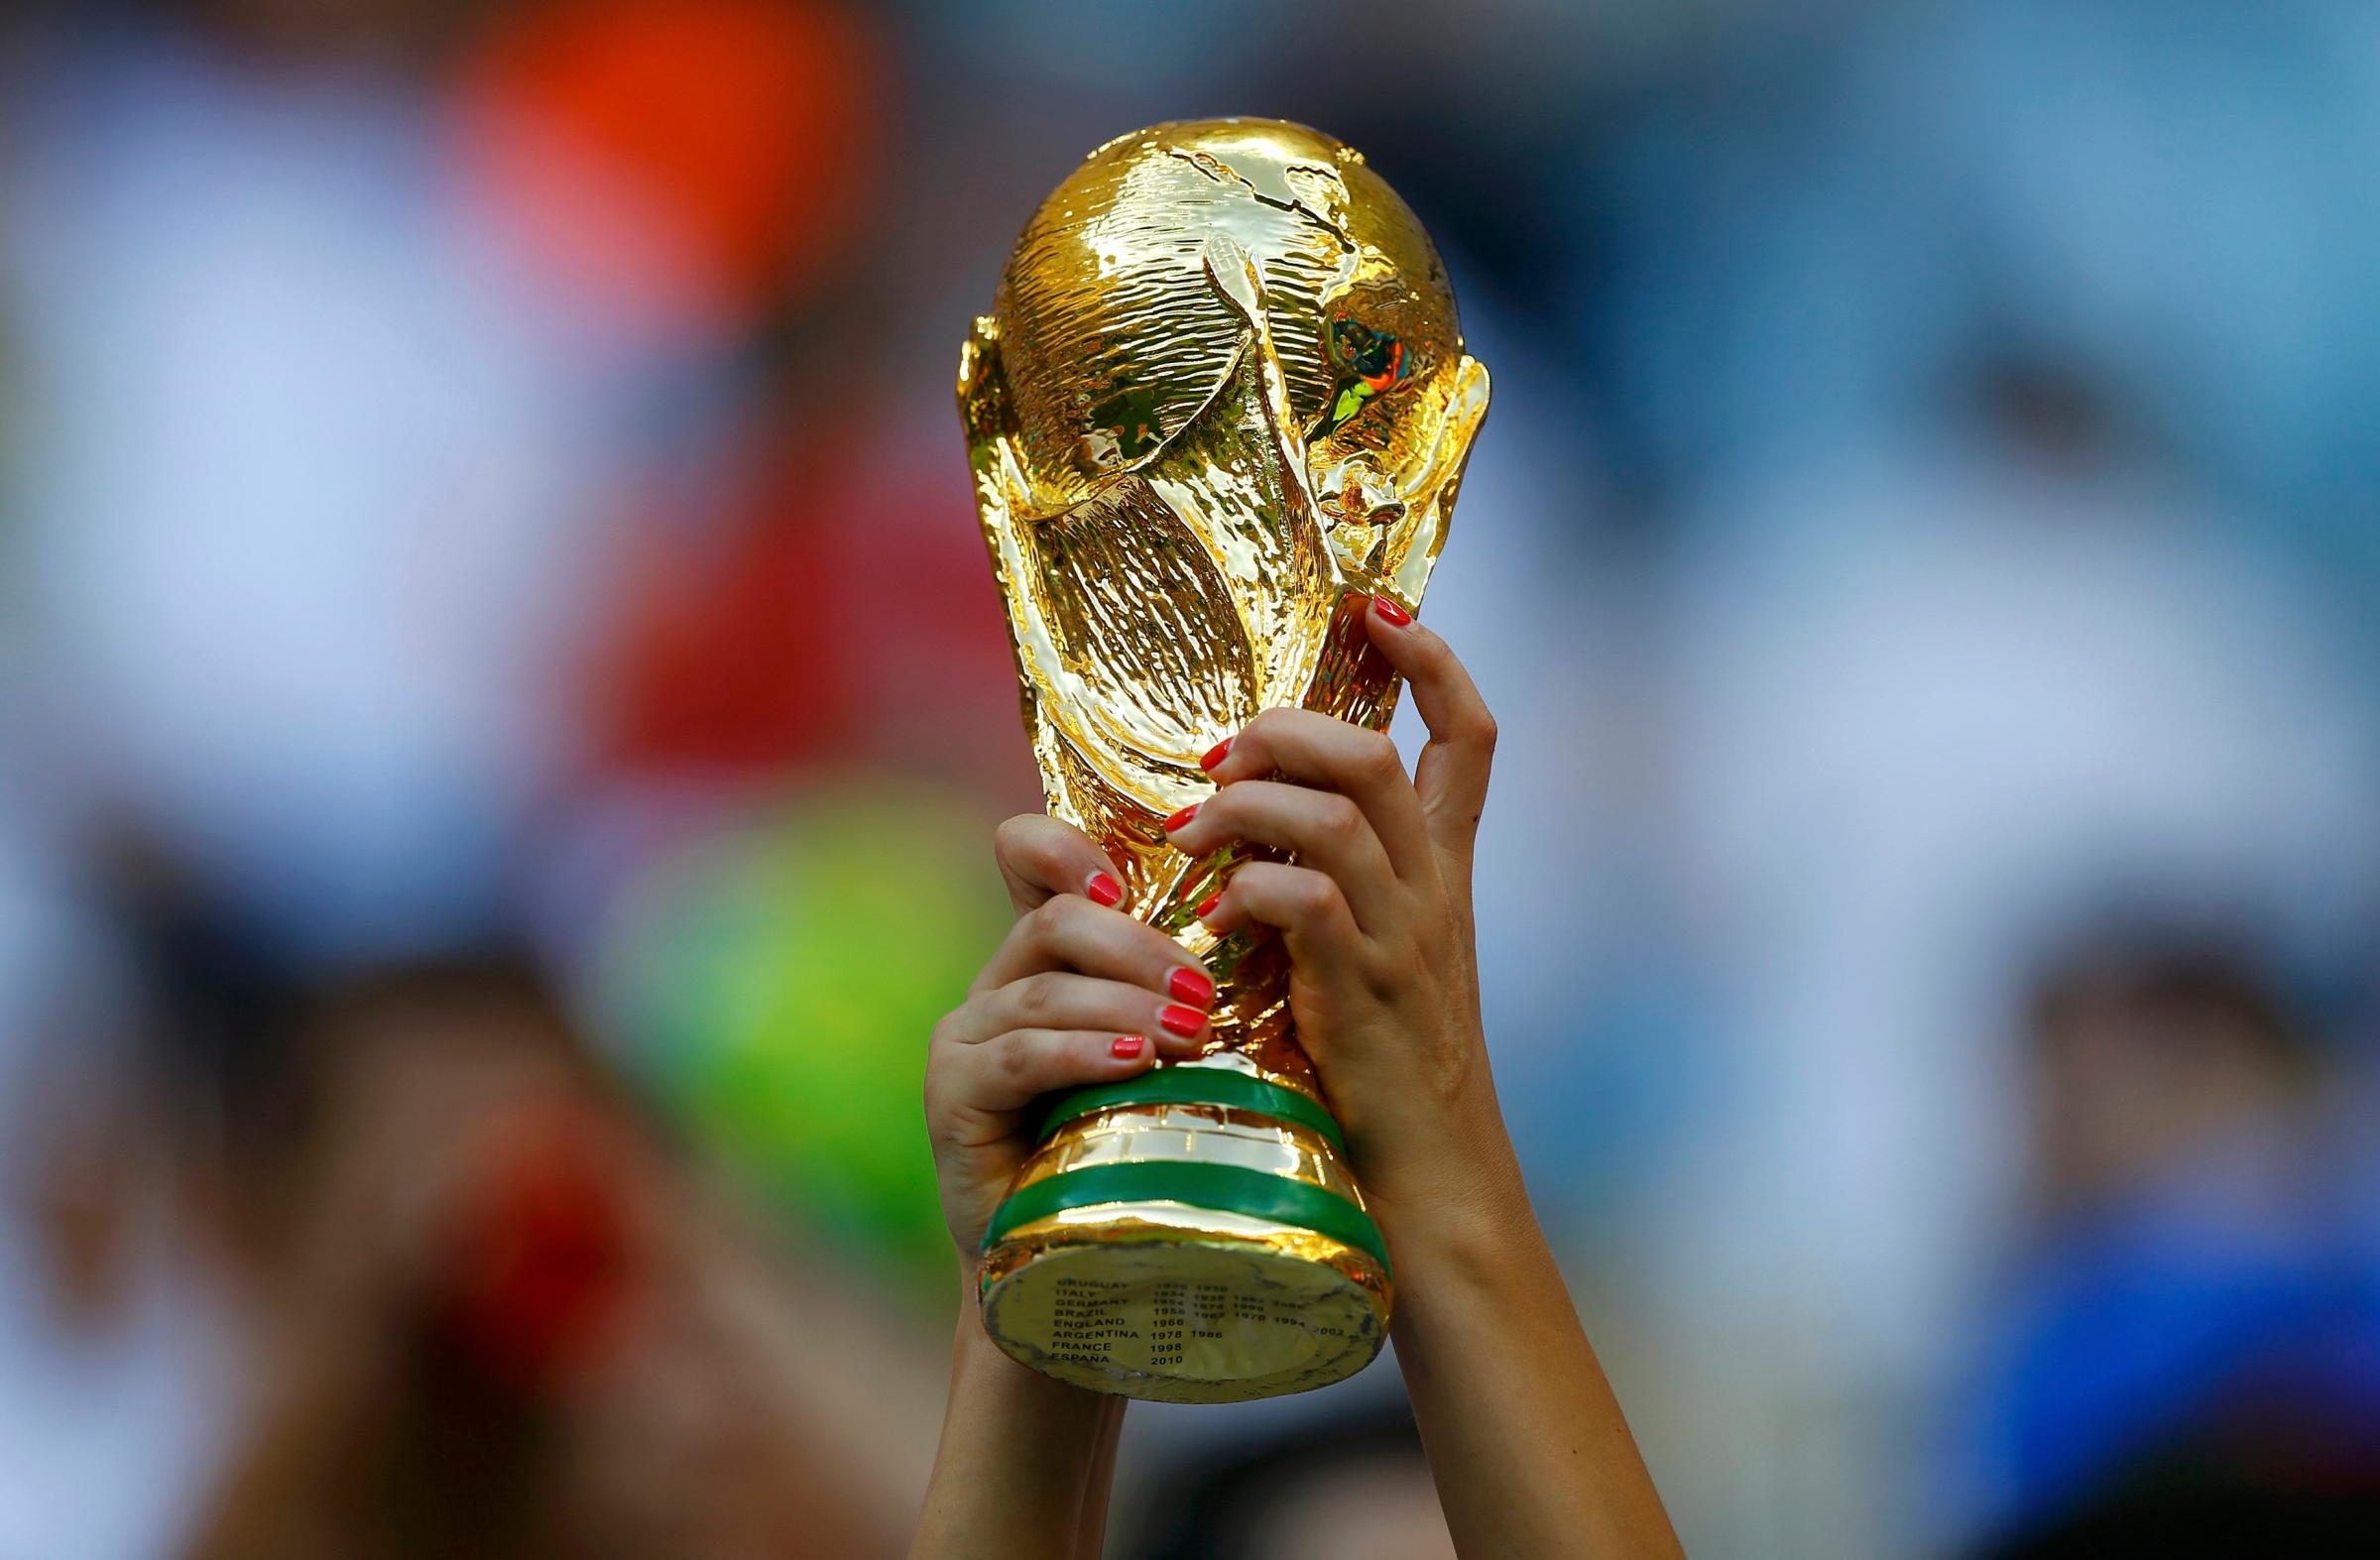 A fan holds up a trophy before the 2014 World Cup Group D soccer match between England and Italy at the Amazonia arena in Manaus on June 14, 2014.